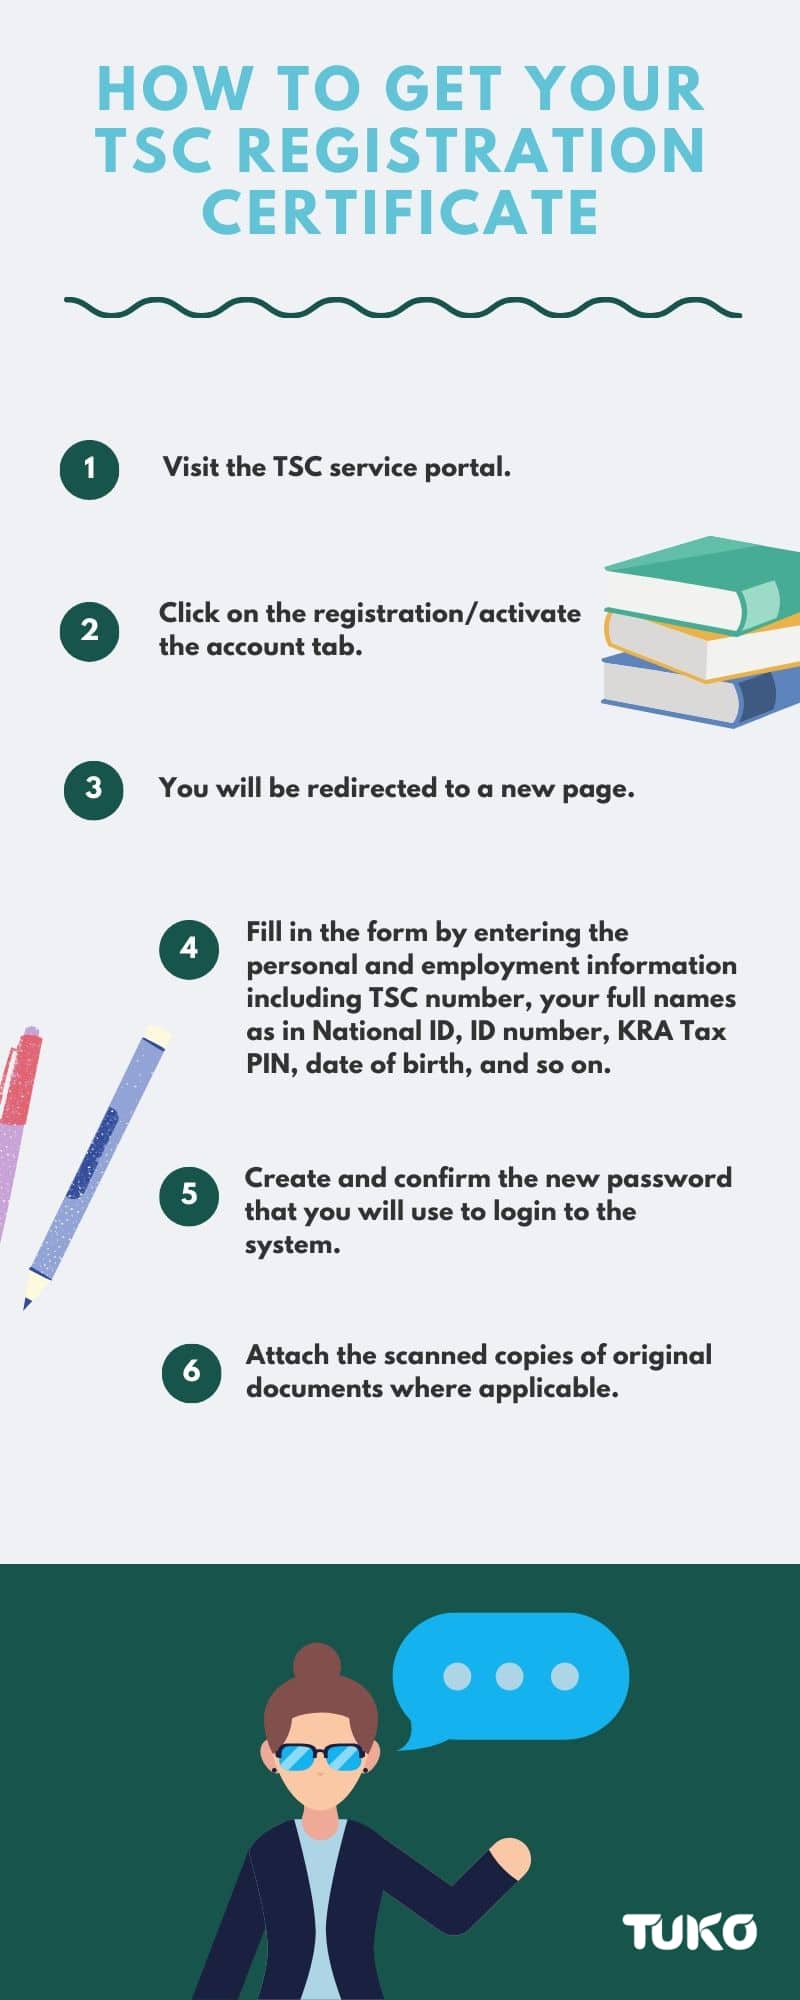 How to get your TSC registration certificate online